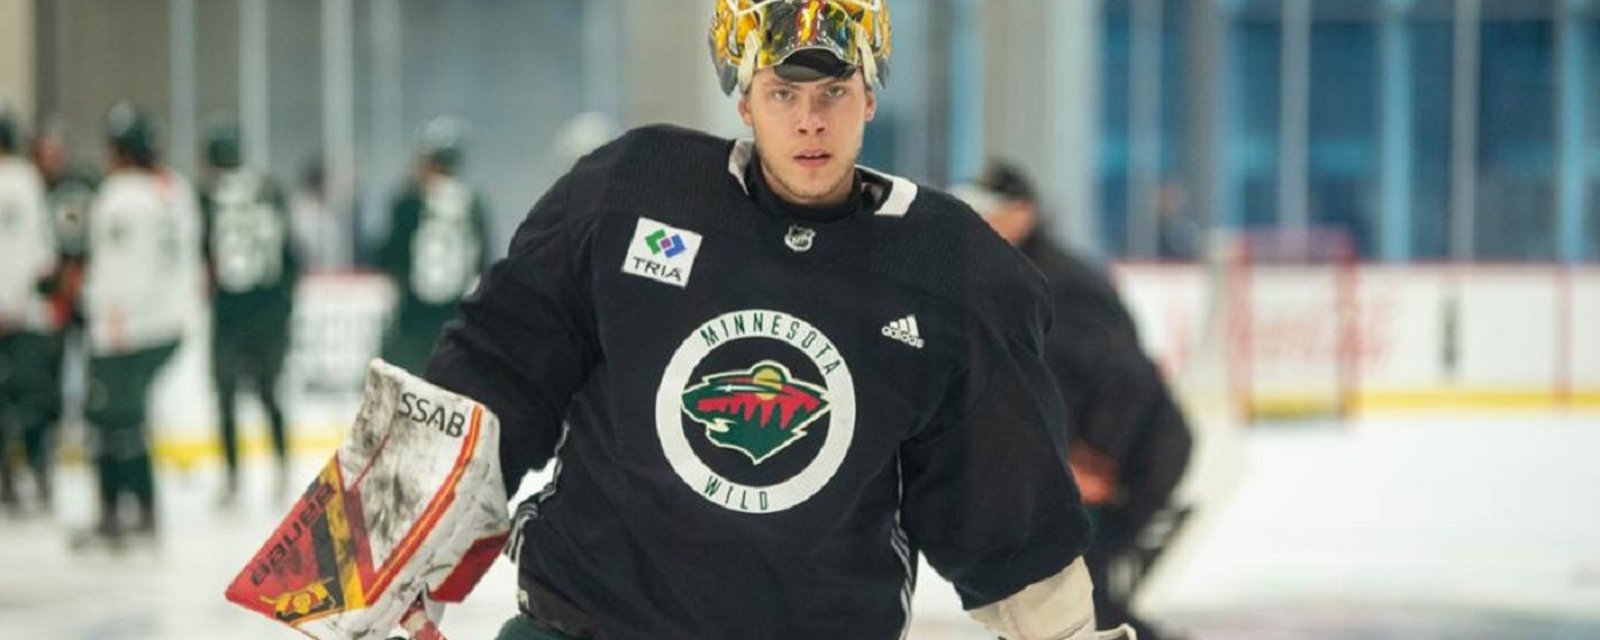 Wild call up rookie goaltender after losing Game 4.